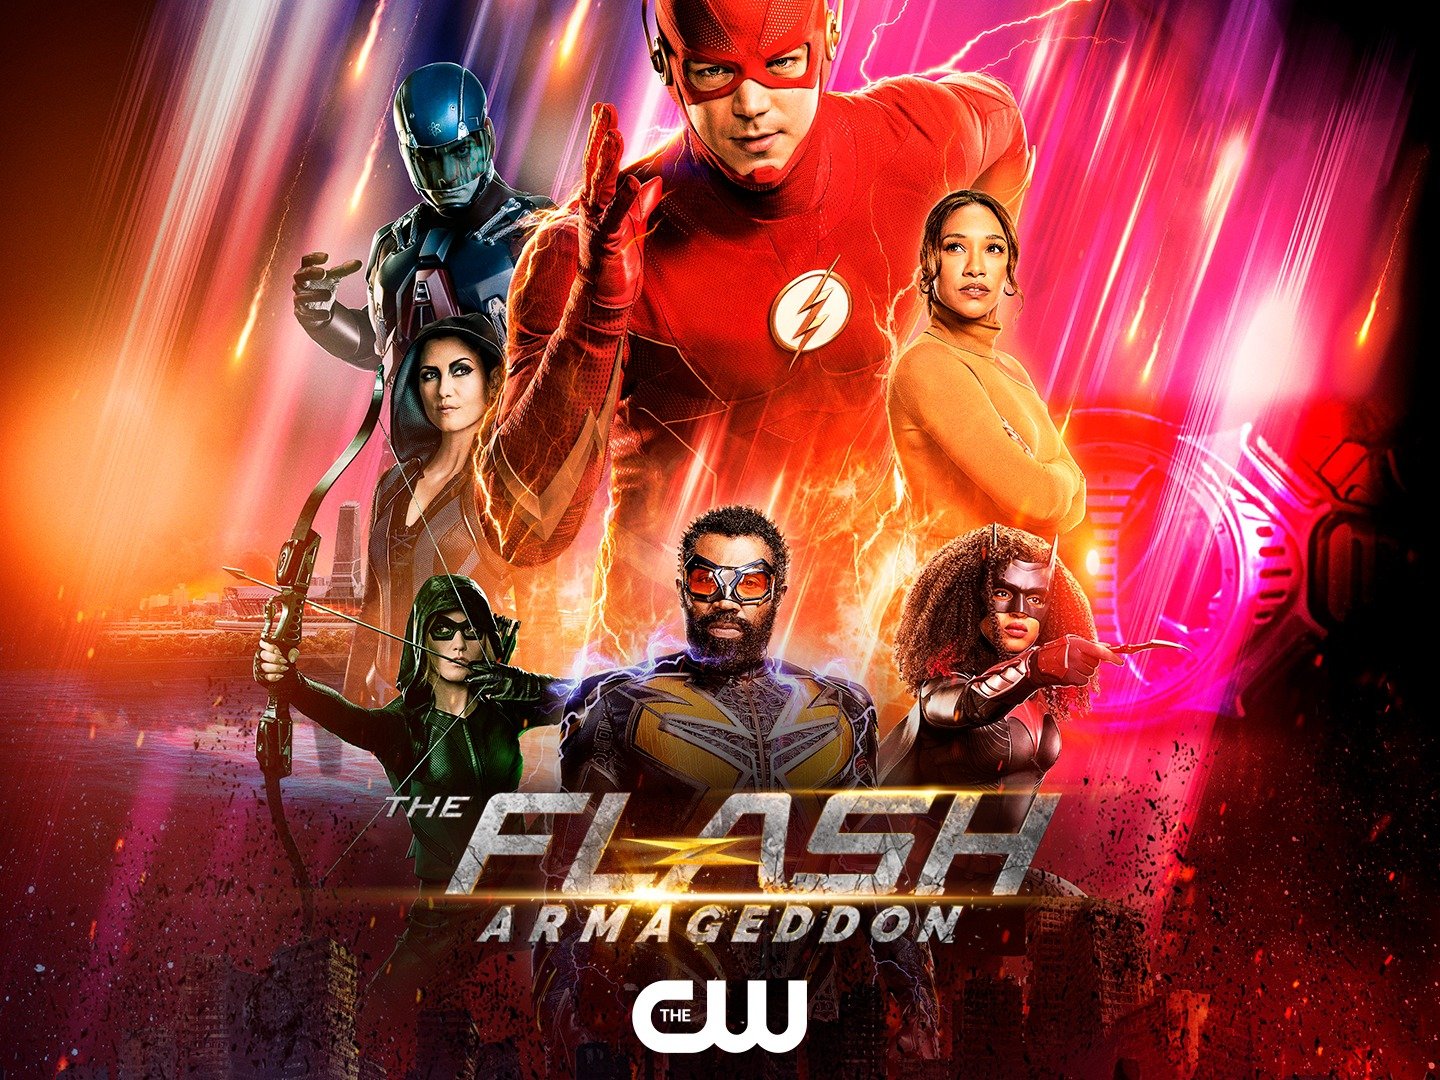 where can i watch the flash season 5 episode 1